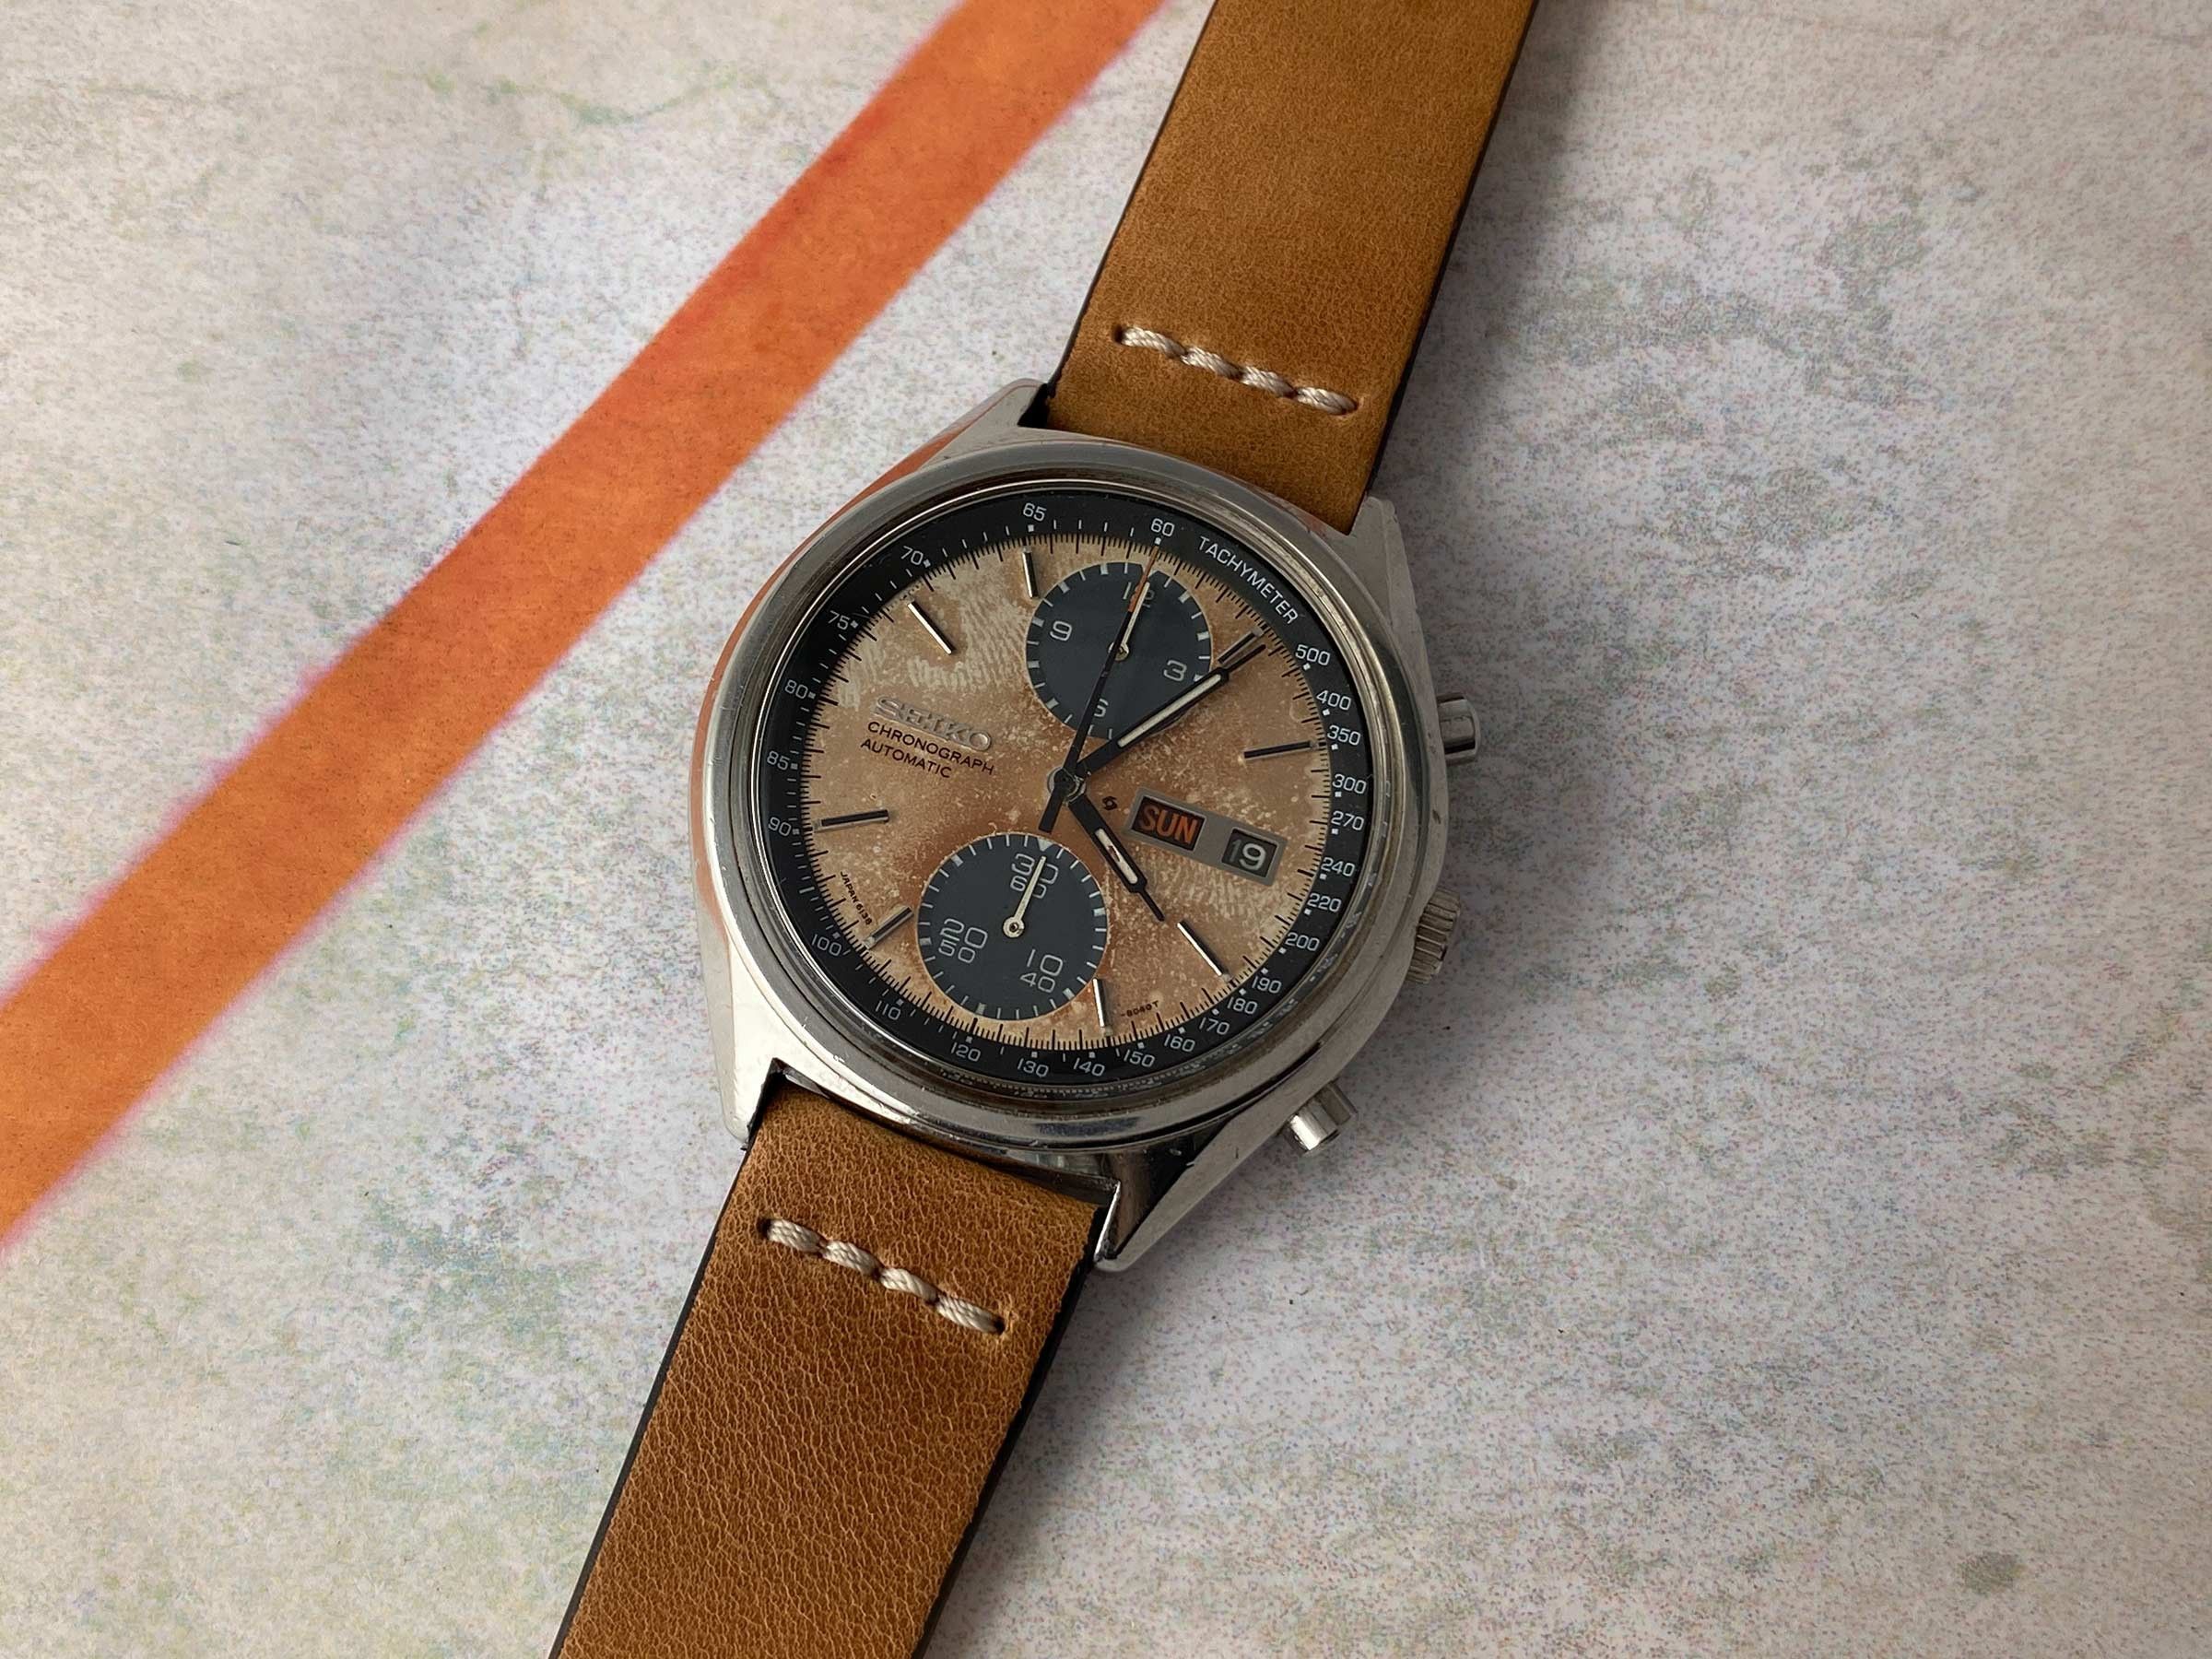 SEIKO PANDA 1978 Automatic vintage chronograph watch Cal. 6138 Ref.  6138-8021 JAPAN A *** TROPICALIZED *** Seiko Vintage watches - Watches83